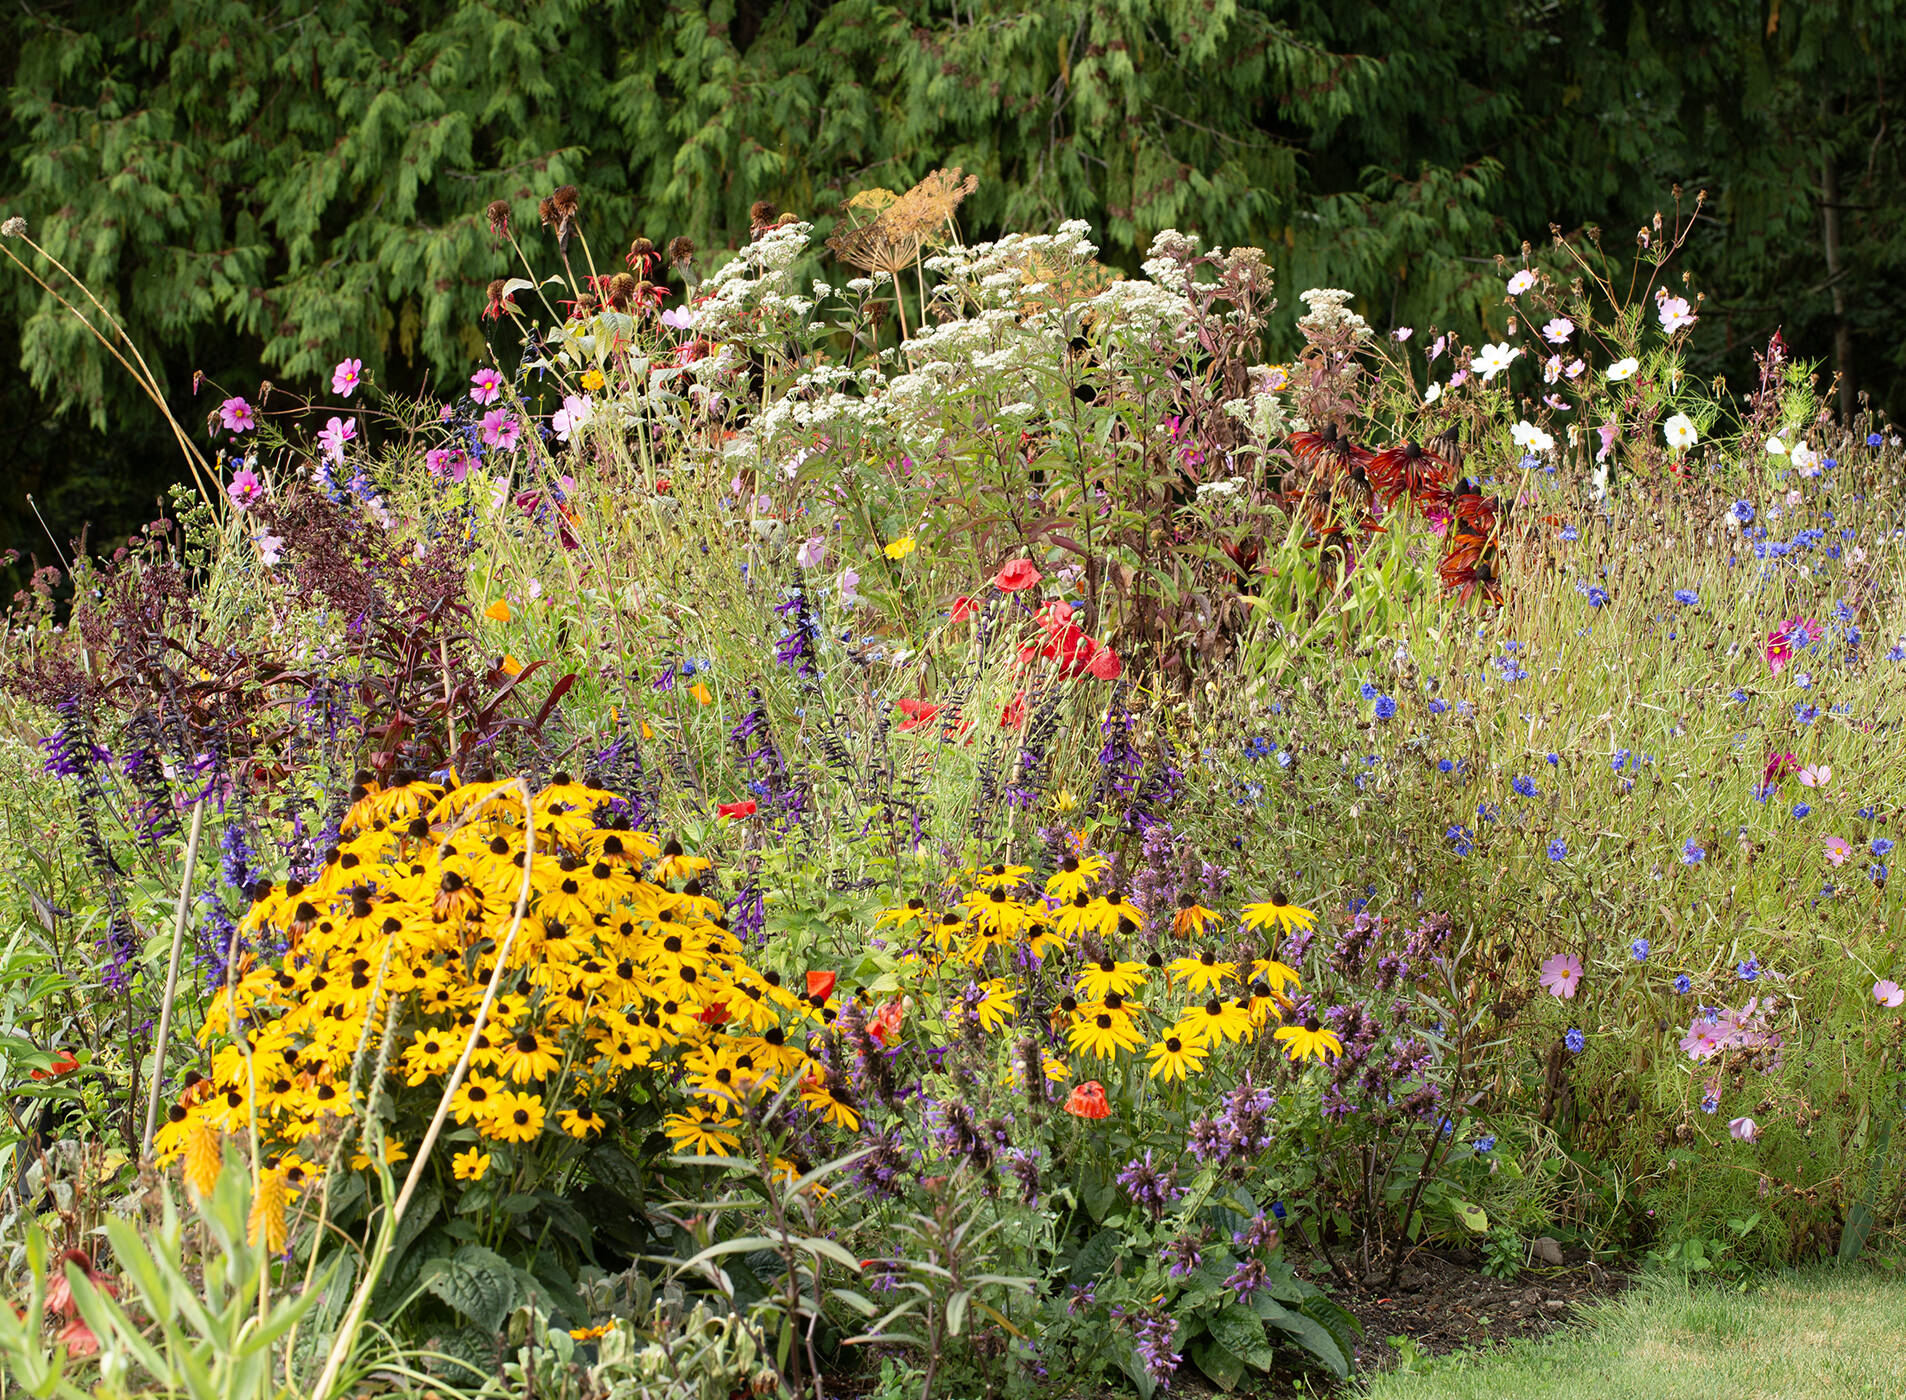 Photo by Robb Drake
An understanding of watering principles can help keep your garden healthy and growing.